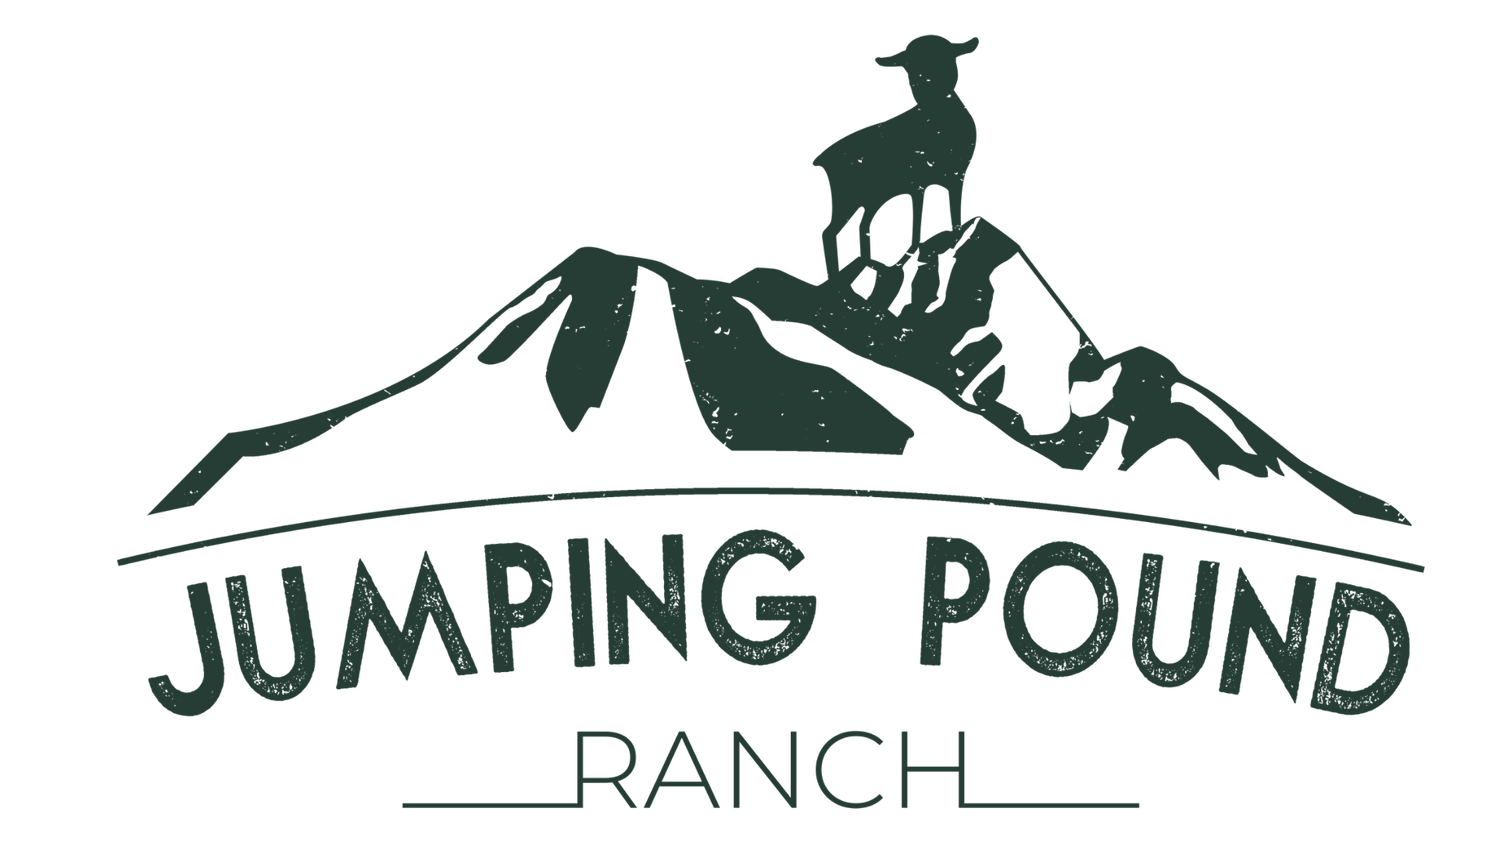 Jumping Pound Ranch